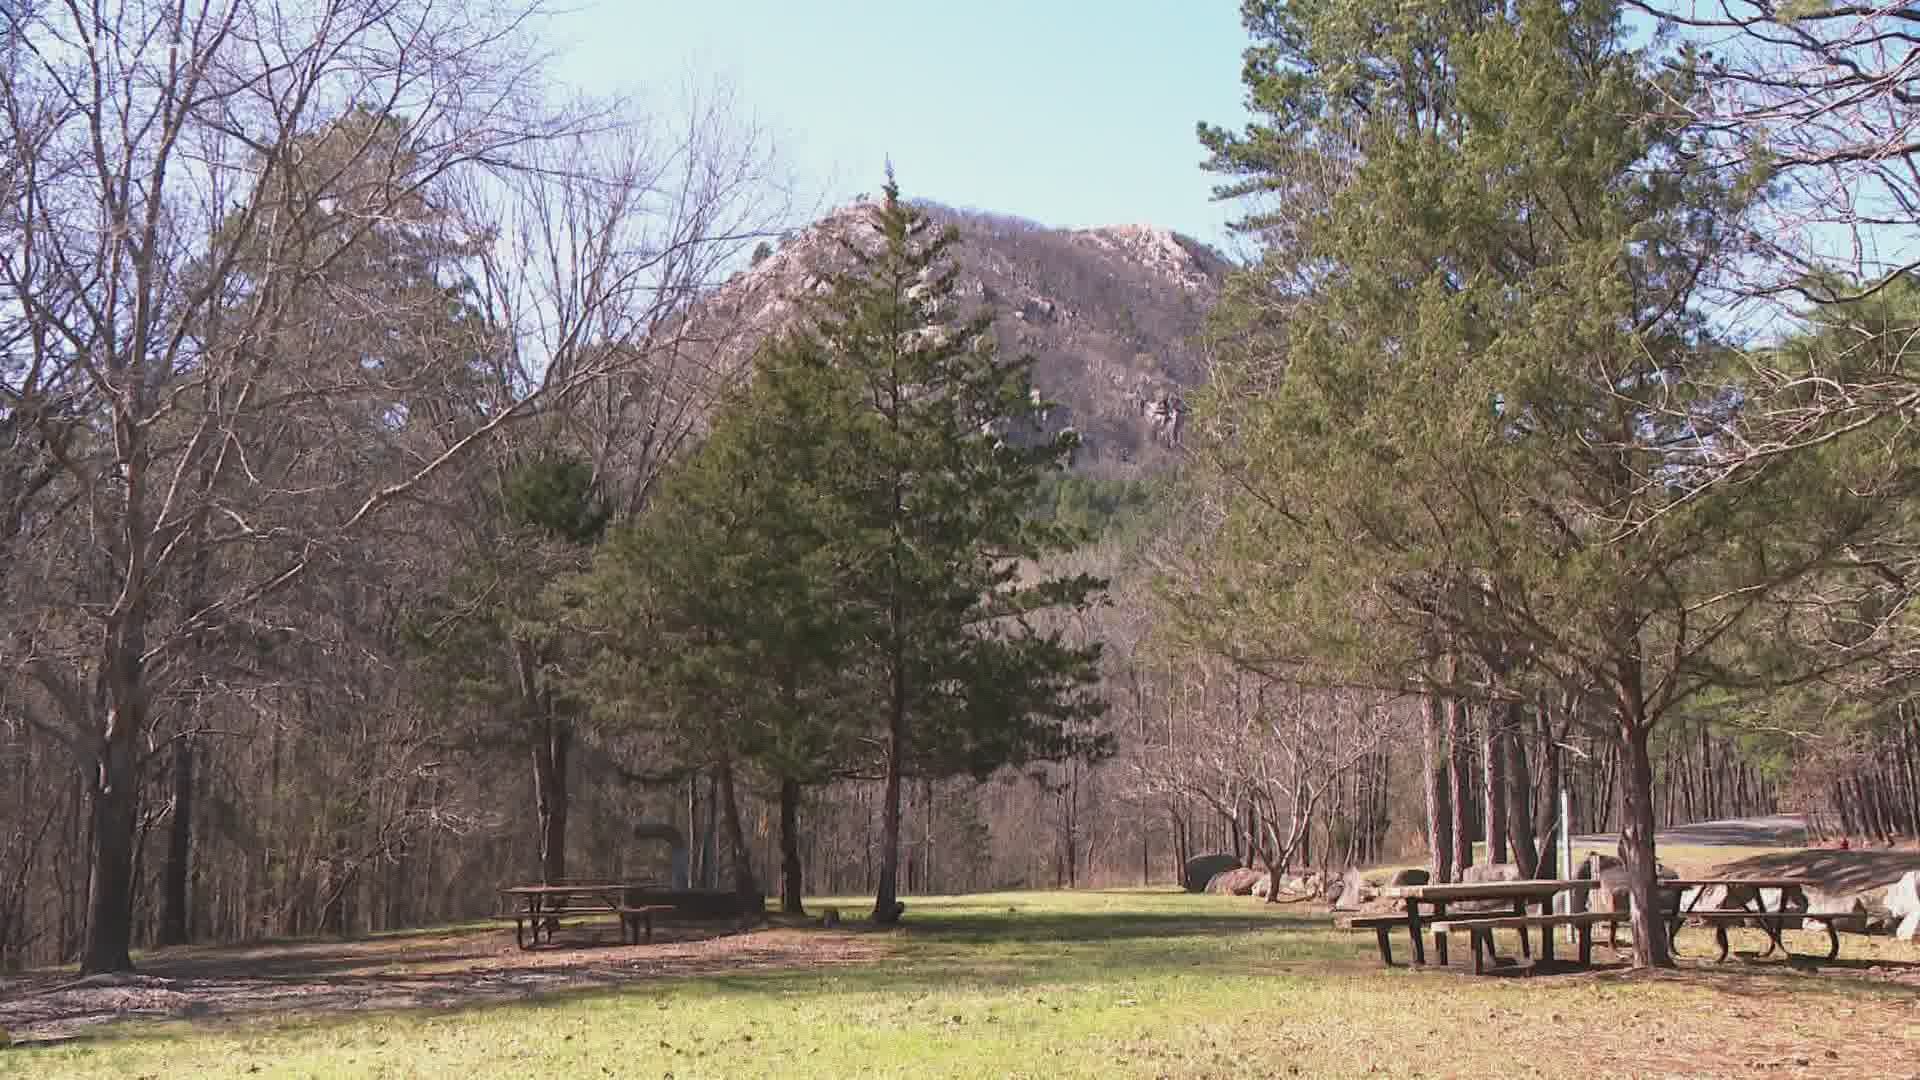 It's the perfect time to explore the new trails that just opened at Pinnacle Mountain.